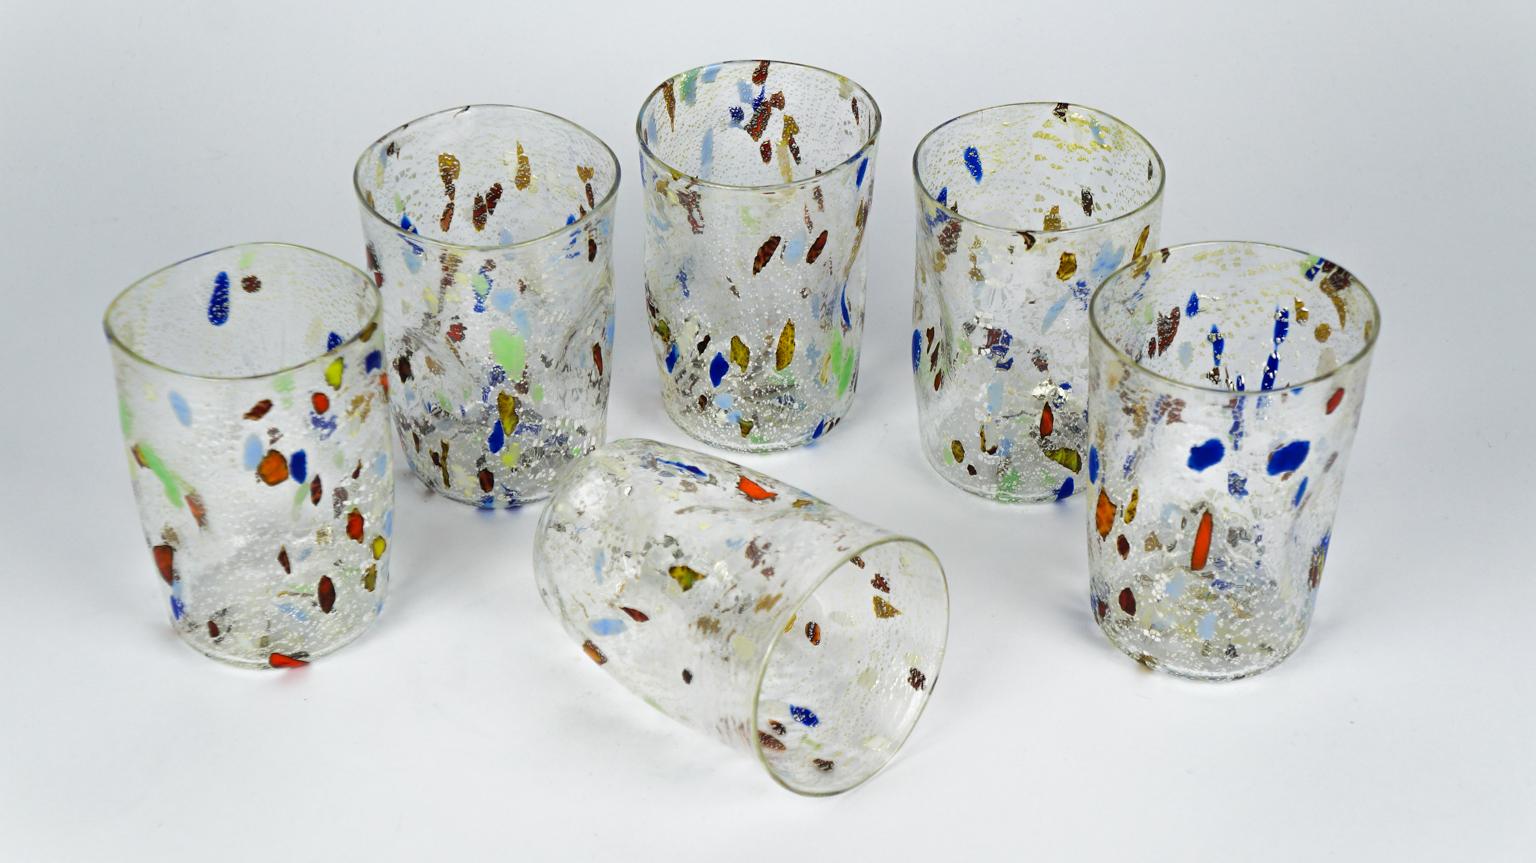 Magnificent series of 6 Murano glasses in Venetian blown glass.
This set is called 